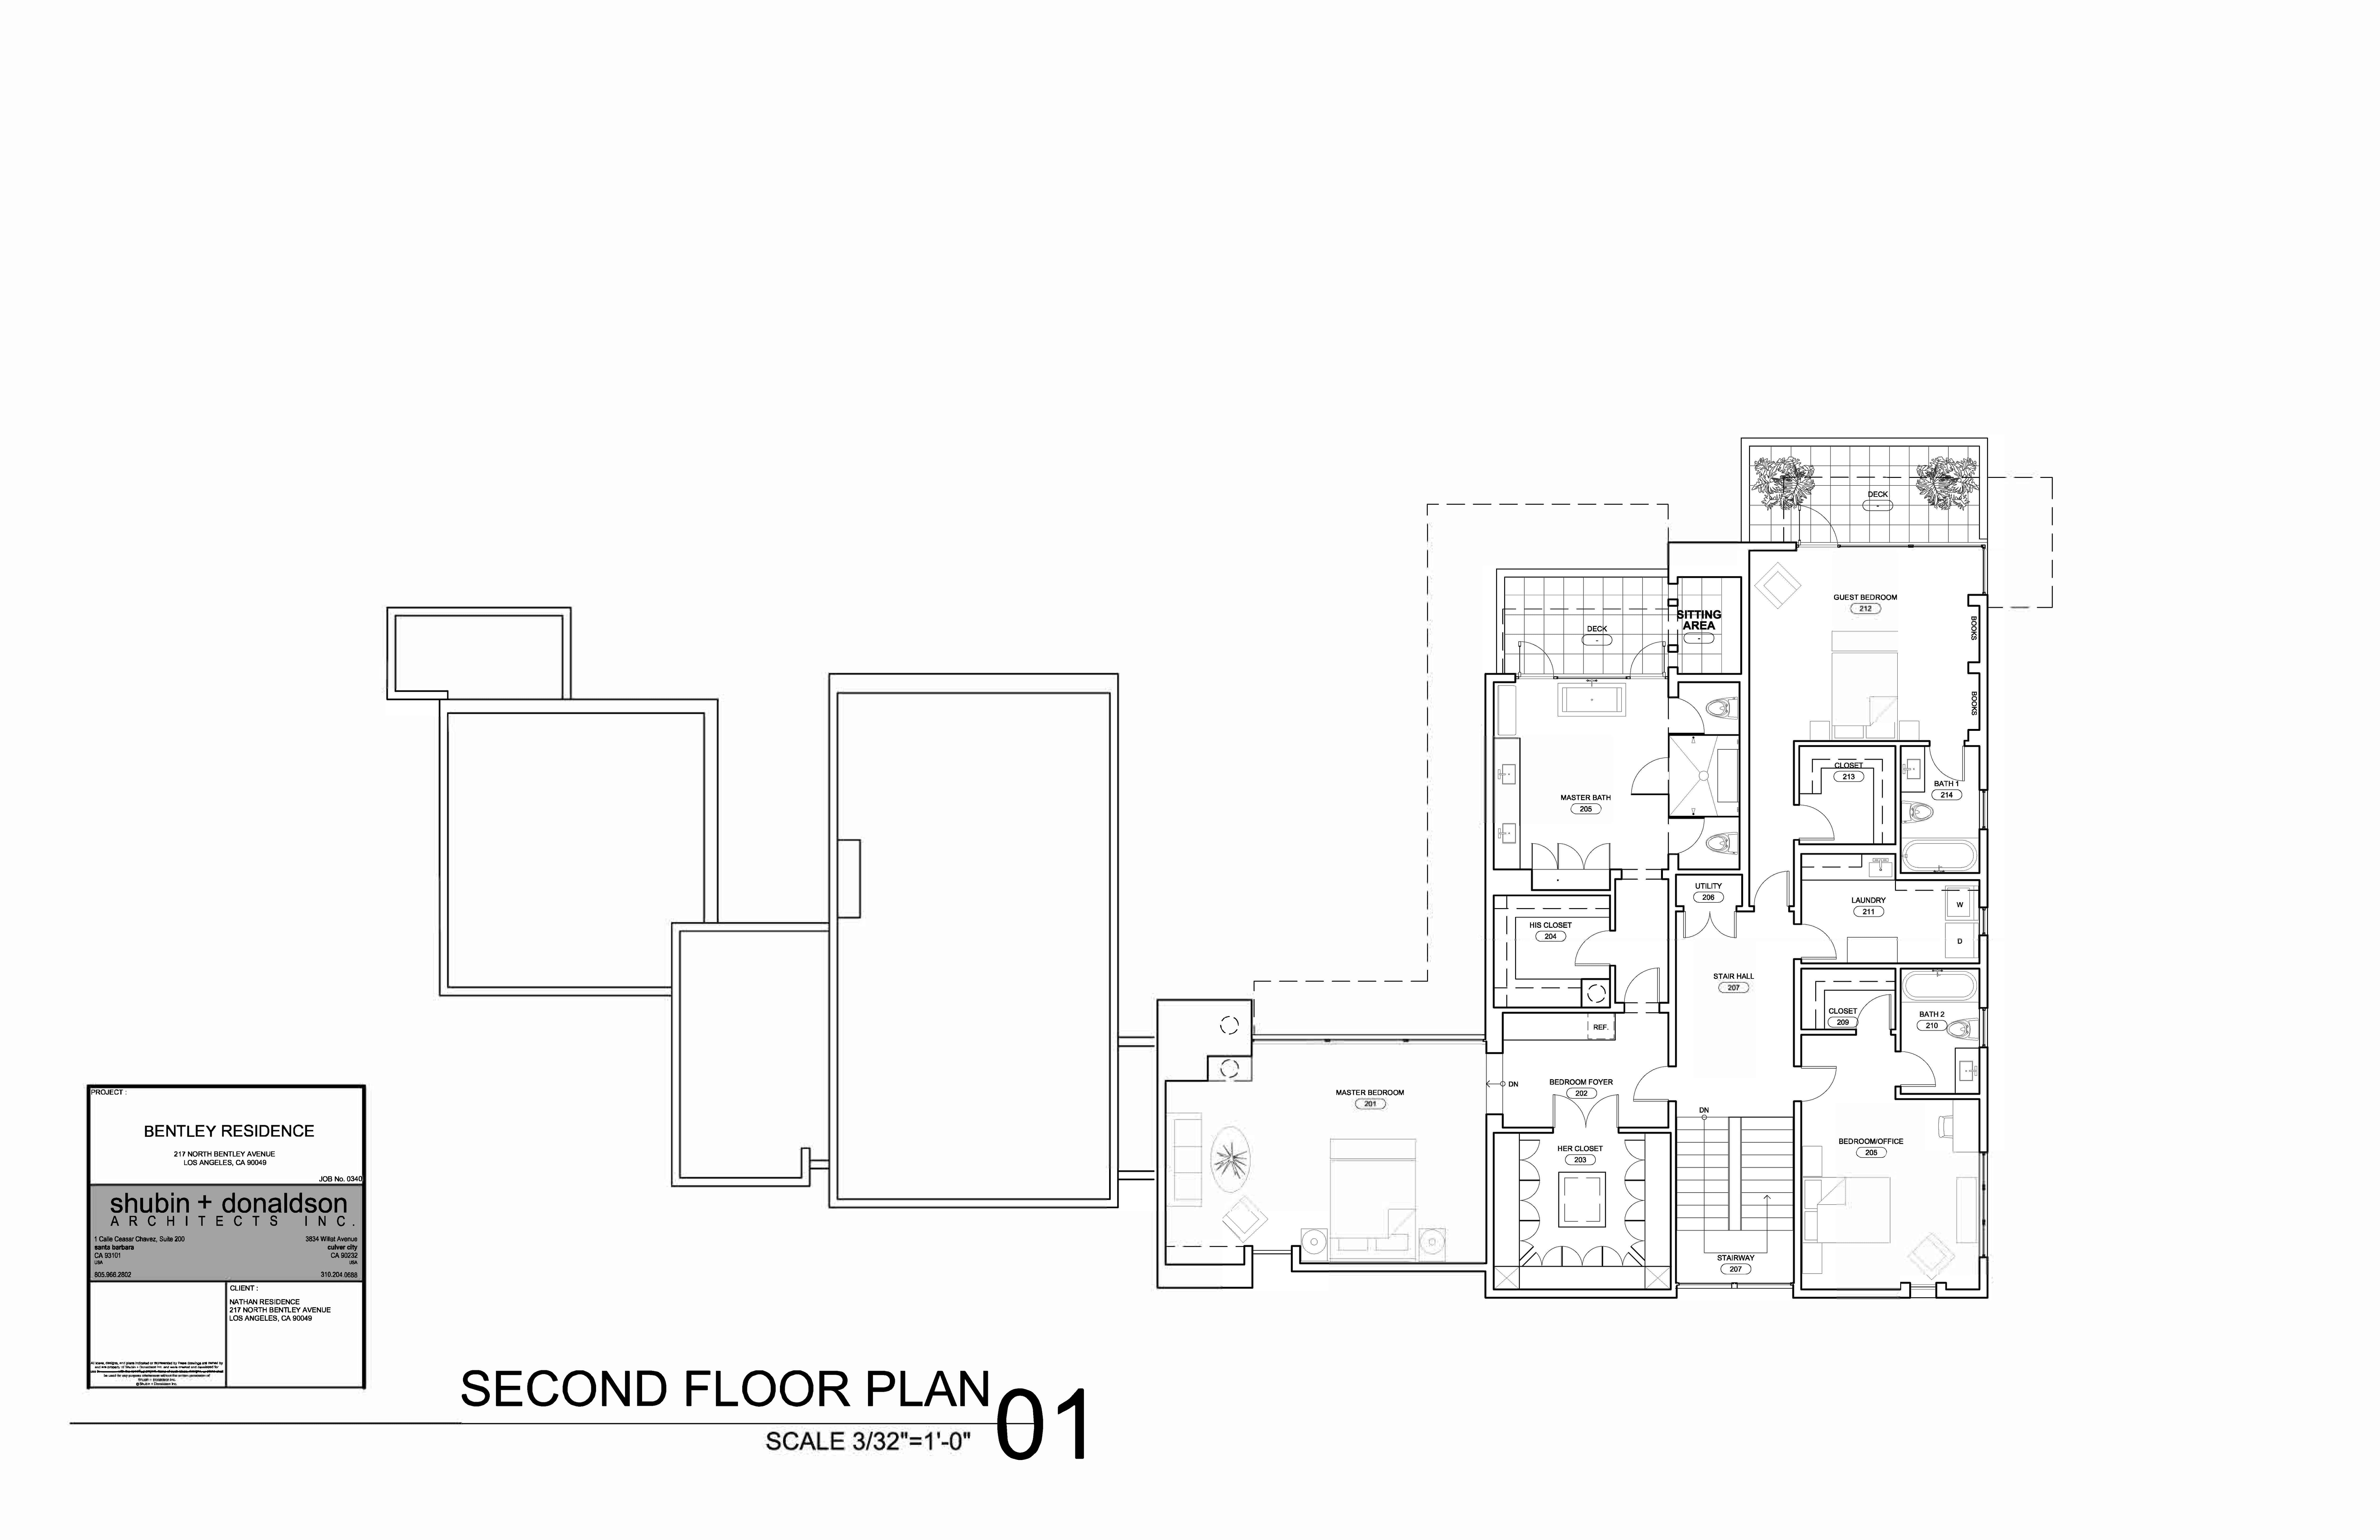 0340_Bentley Residence_0340_PLANS_Page_2